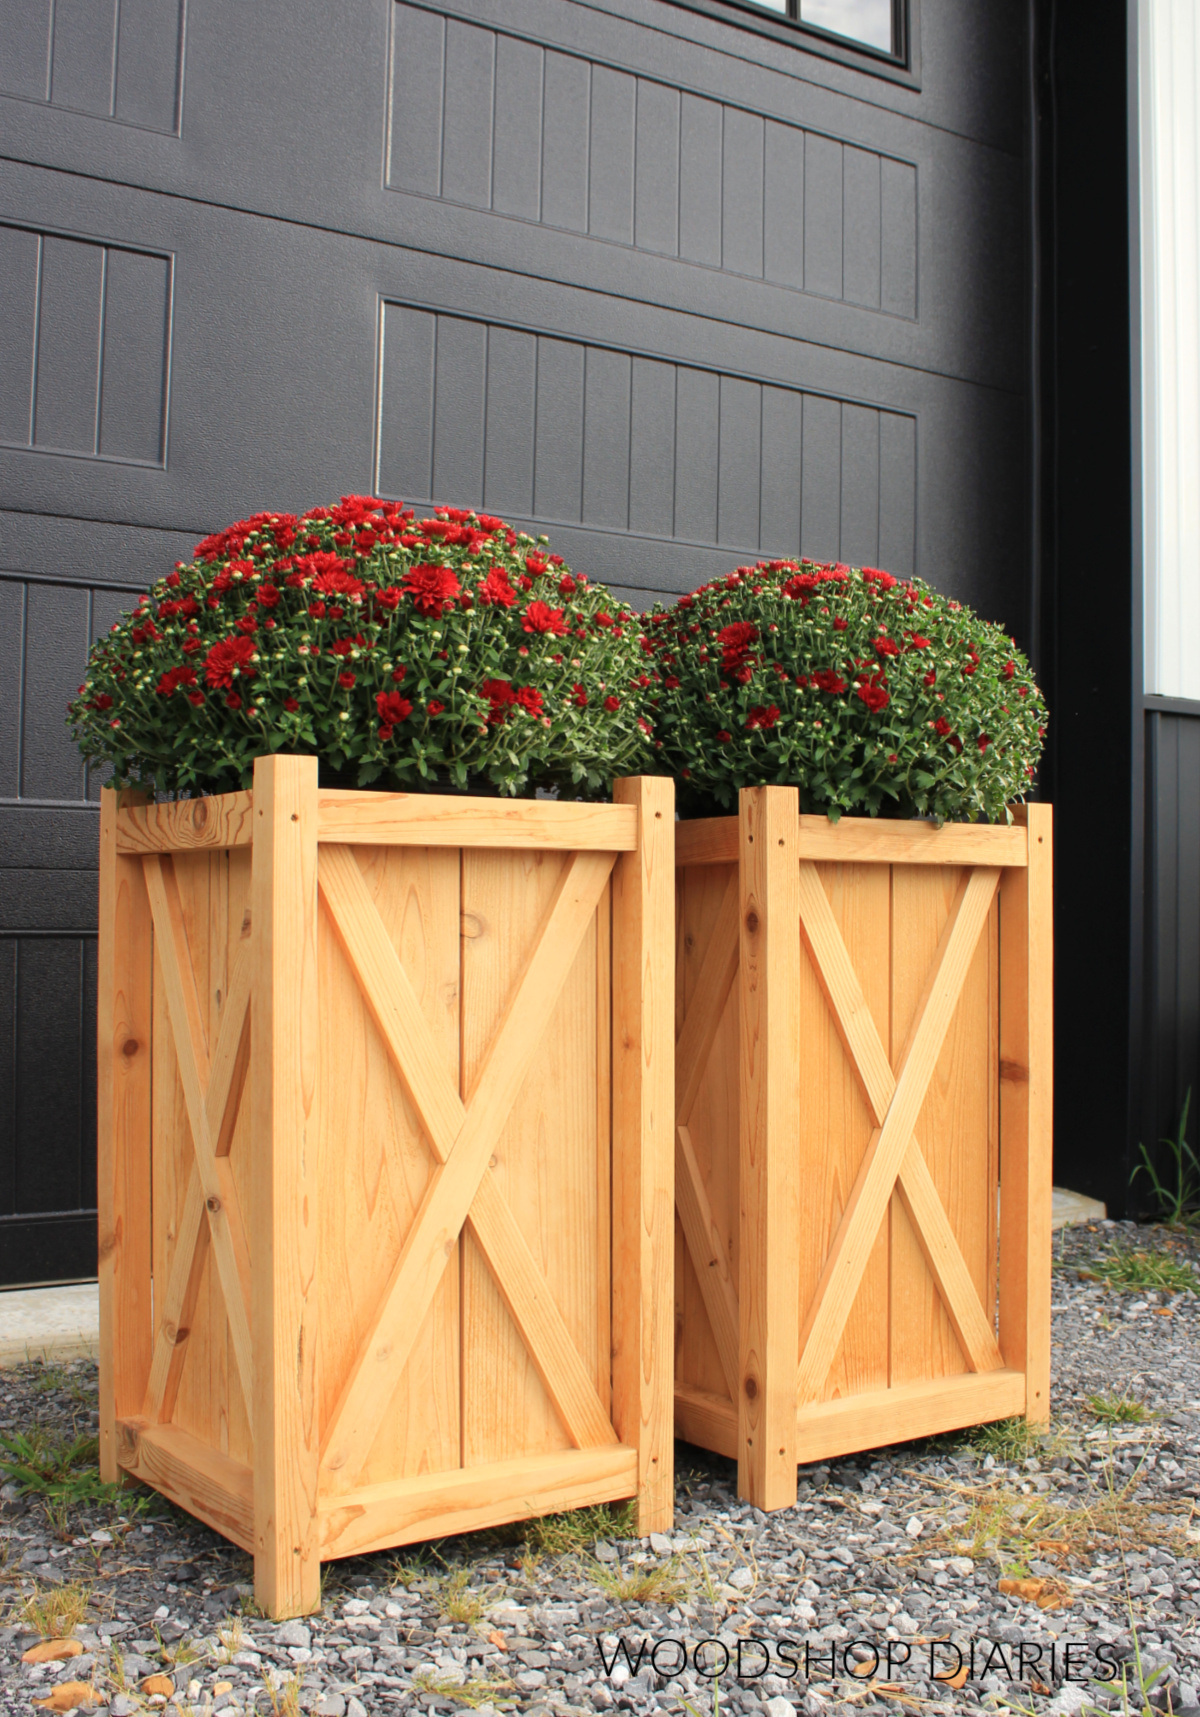 Pair of completed DIY wooden planters with X trim detail in front of black garage door with red mums inside